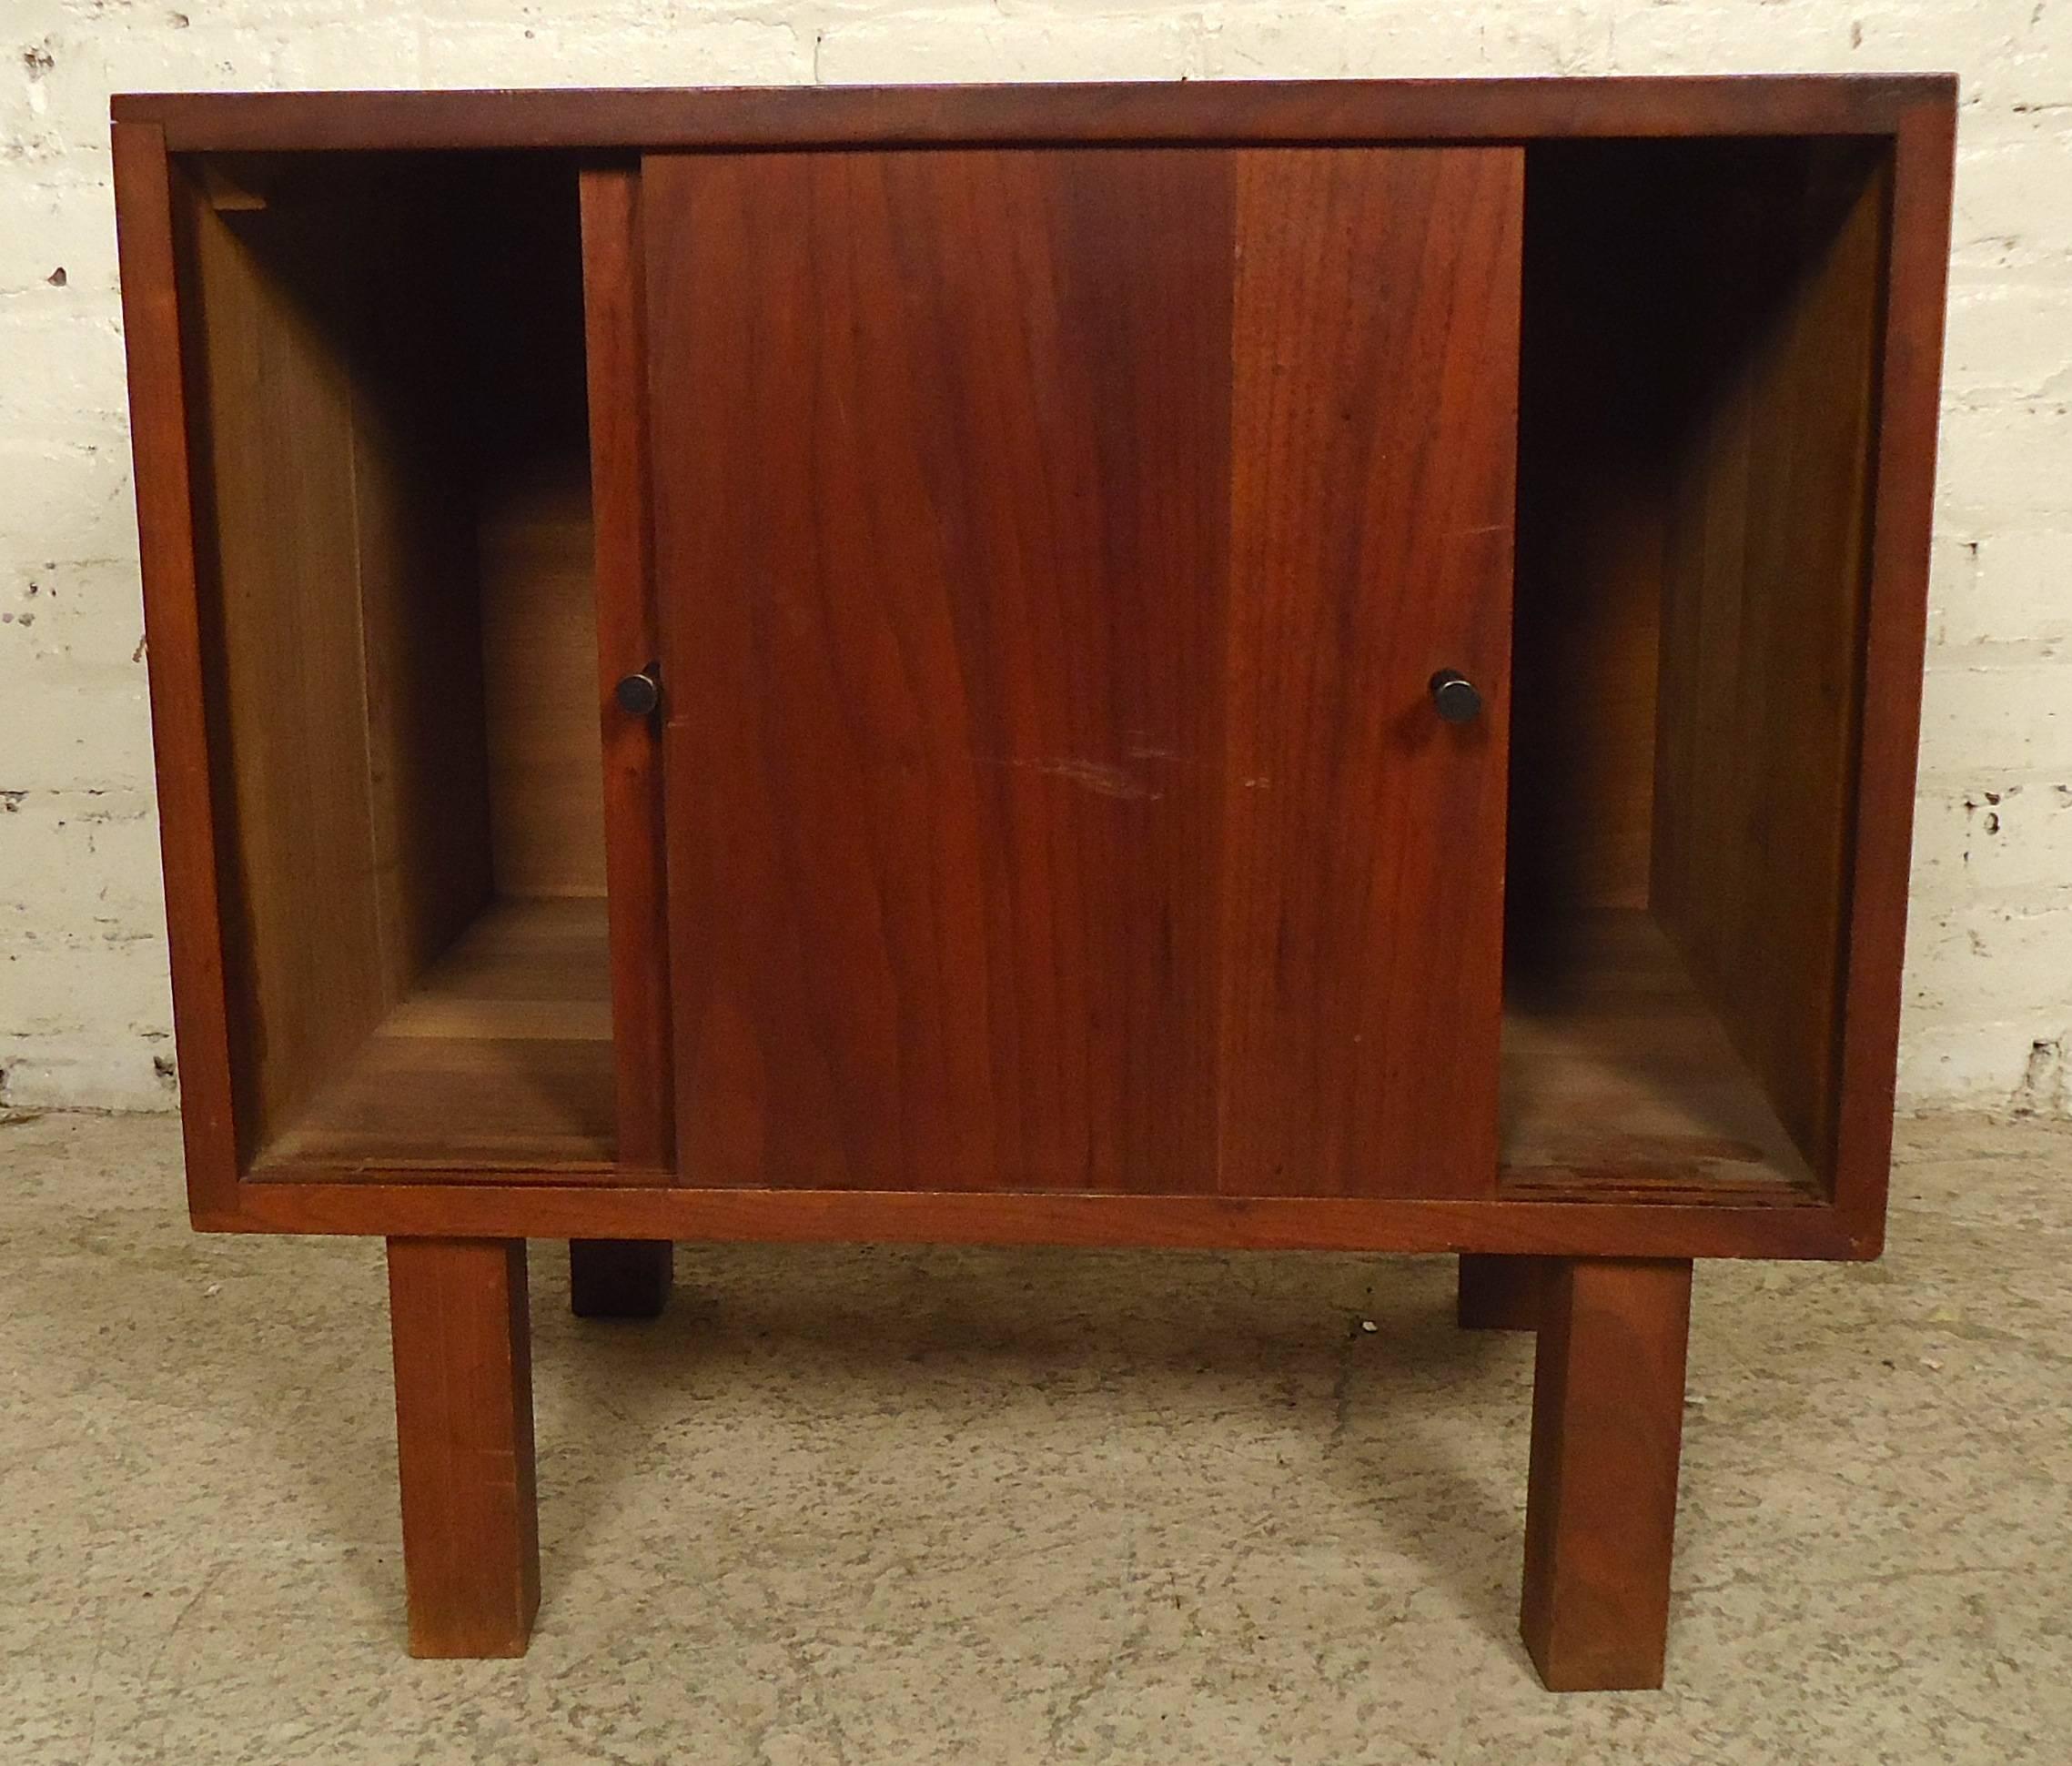 This vintage-modern side table features sliding doors, rich walnut grain and four solid legs.

Please confirm item location (NY or NJ) with dealer.